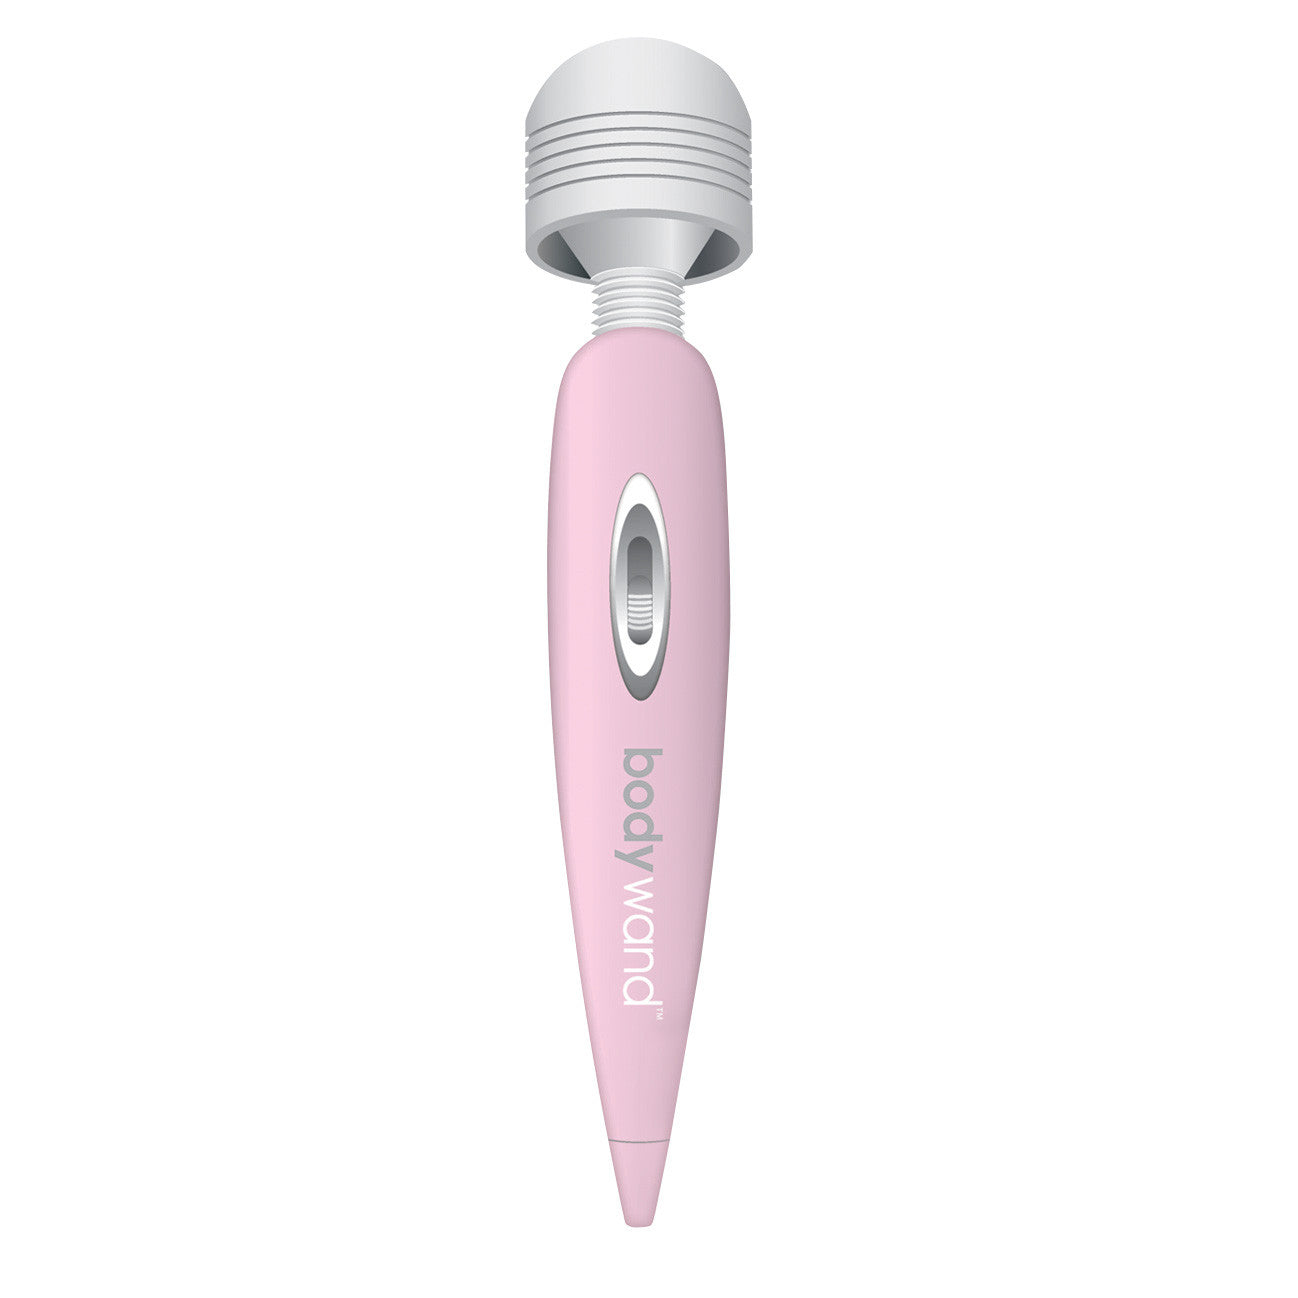 Bodywand - Rechargeable USB Wand Massager (Pink) -  Wand Massagers (Vibration) Rechargeable  Durio.sg